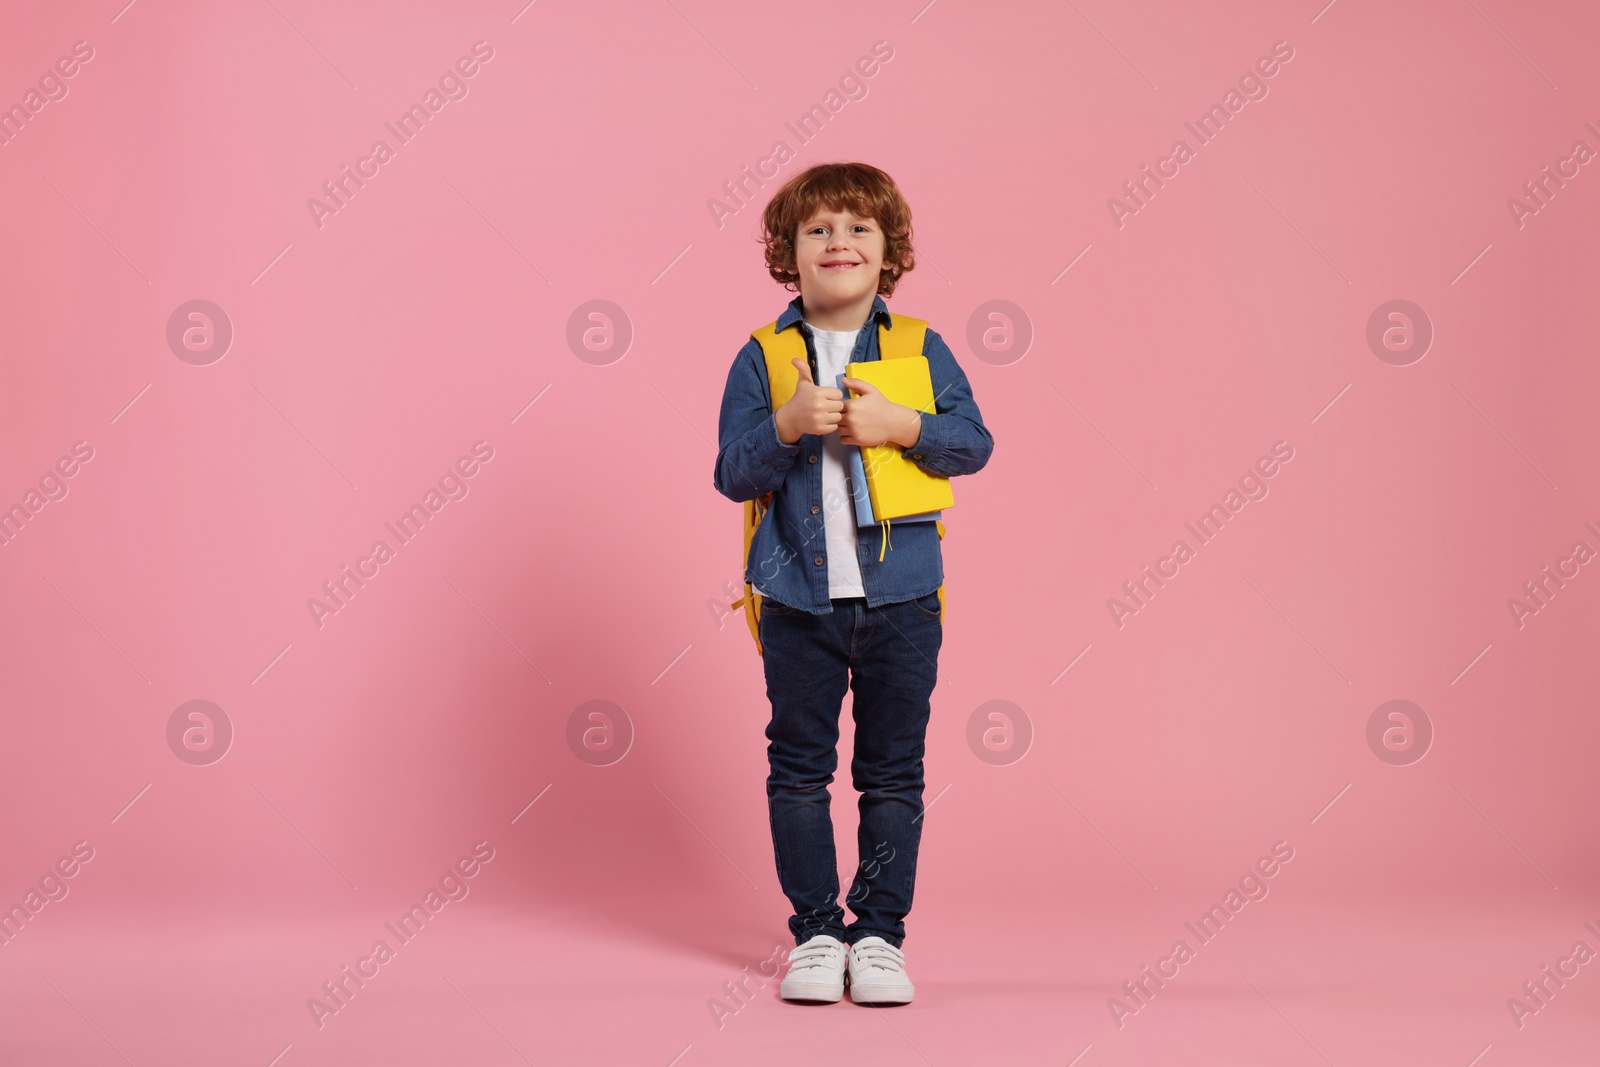 Photo of Happy schoolboy with backpack and books showing thumb up gesture on pink background